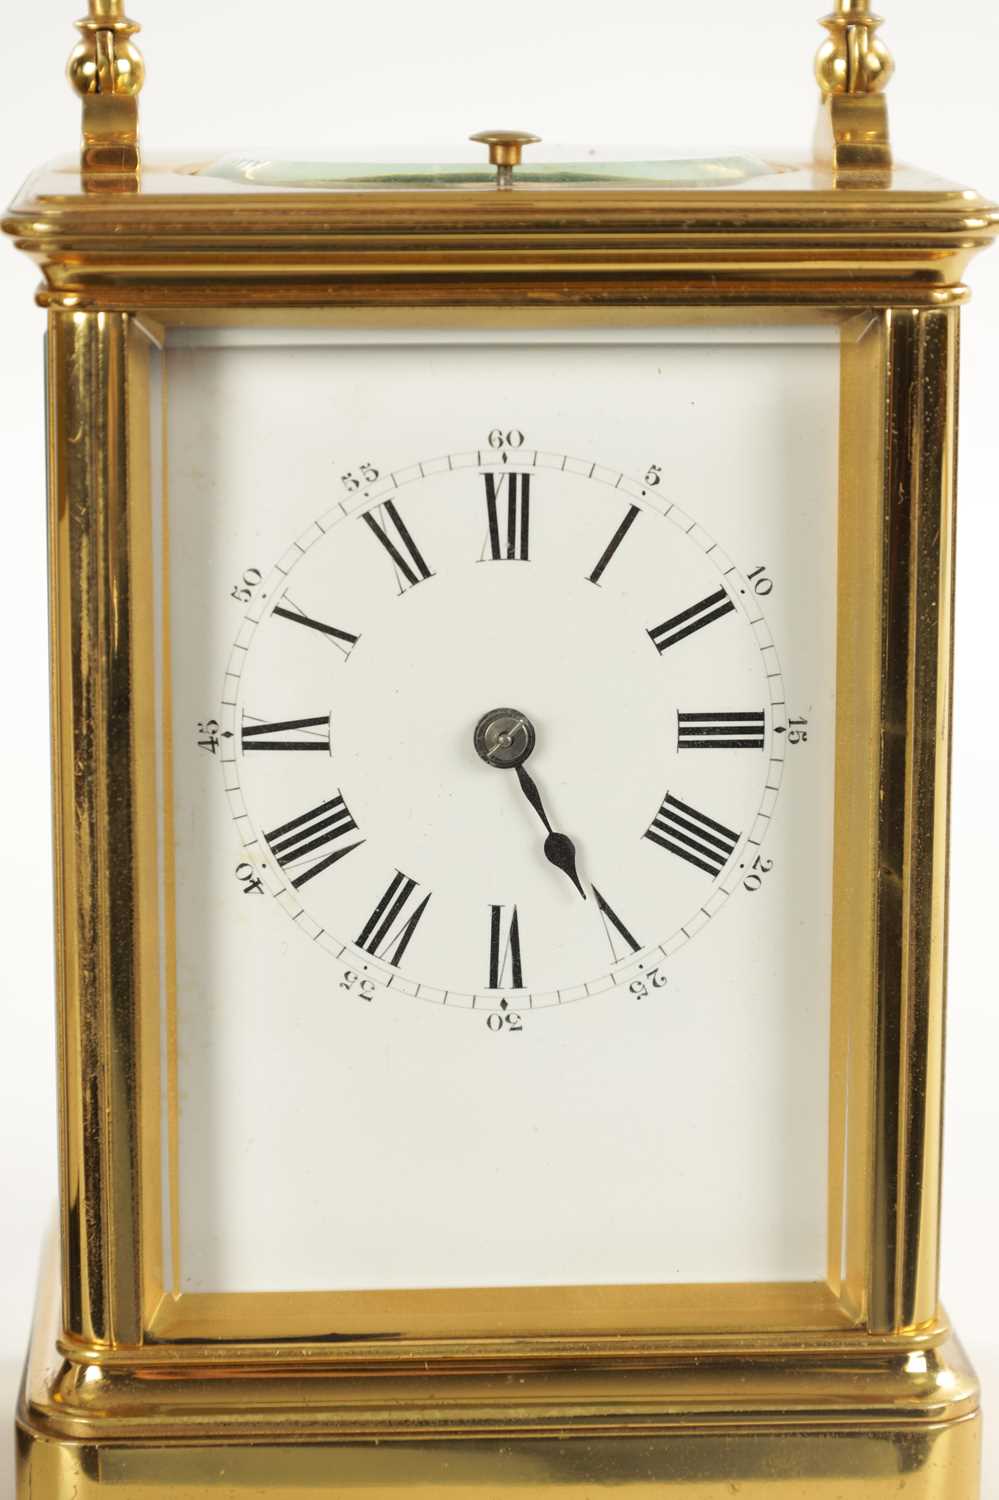 A LATE 19TH CENTURY FRENCH GRAND SONNERIE REPEATING CARRIAGE CLOCK - Image 3 of 8